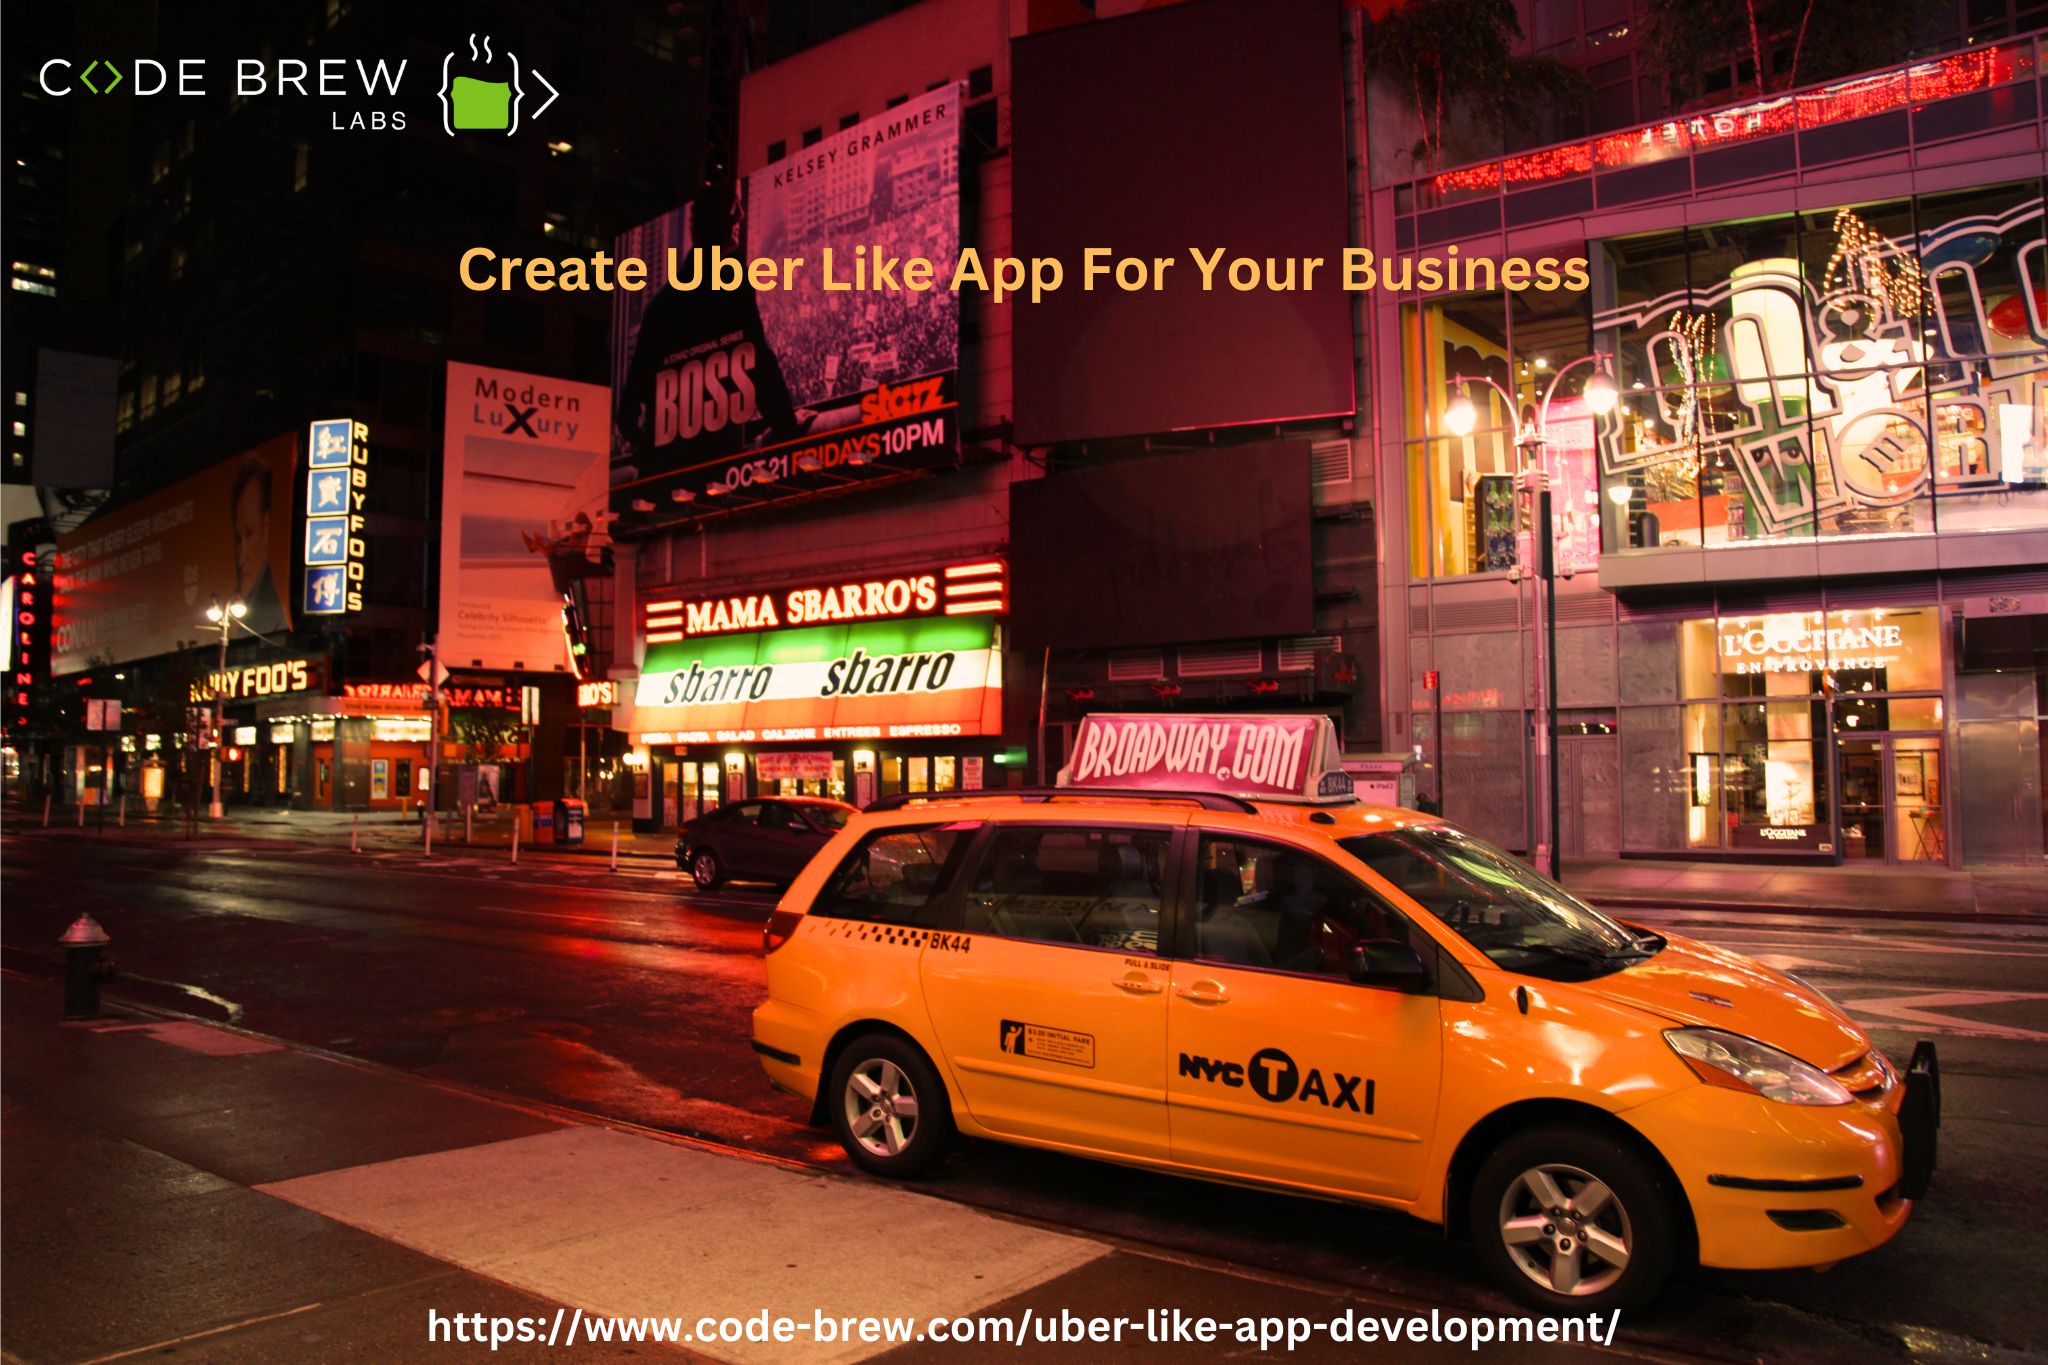 Make Uber Like App With Custom Features | Code Brew Labs